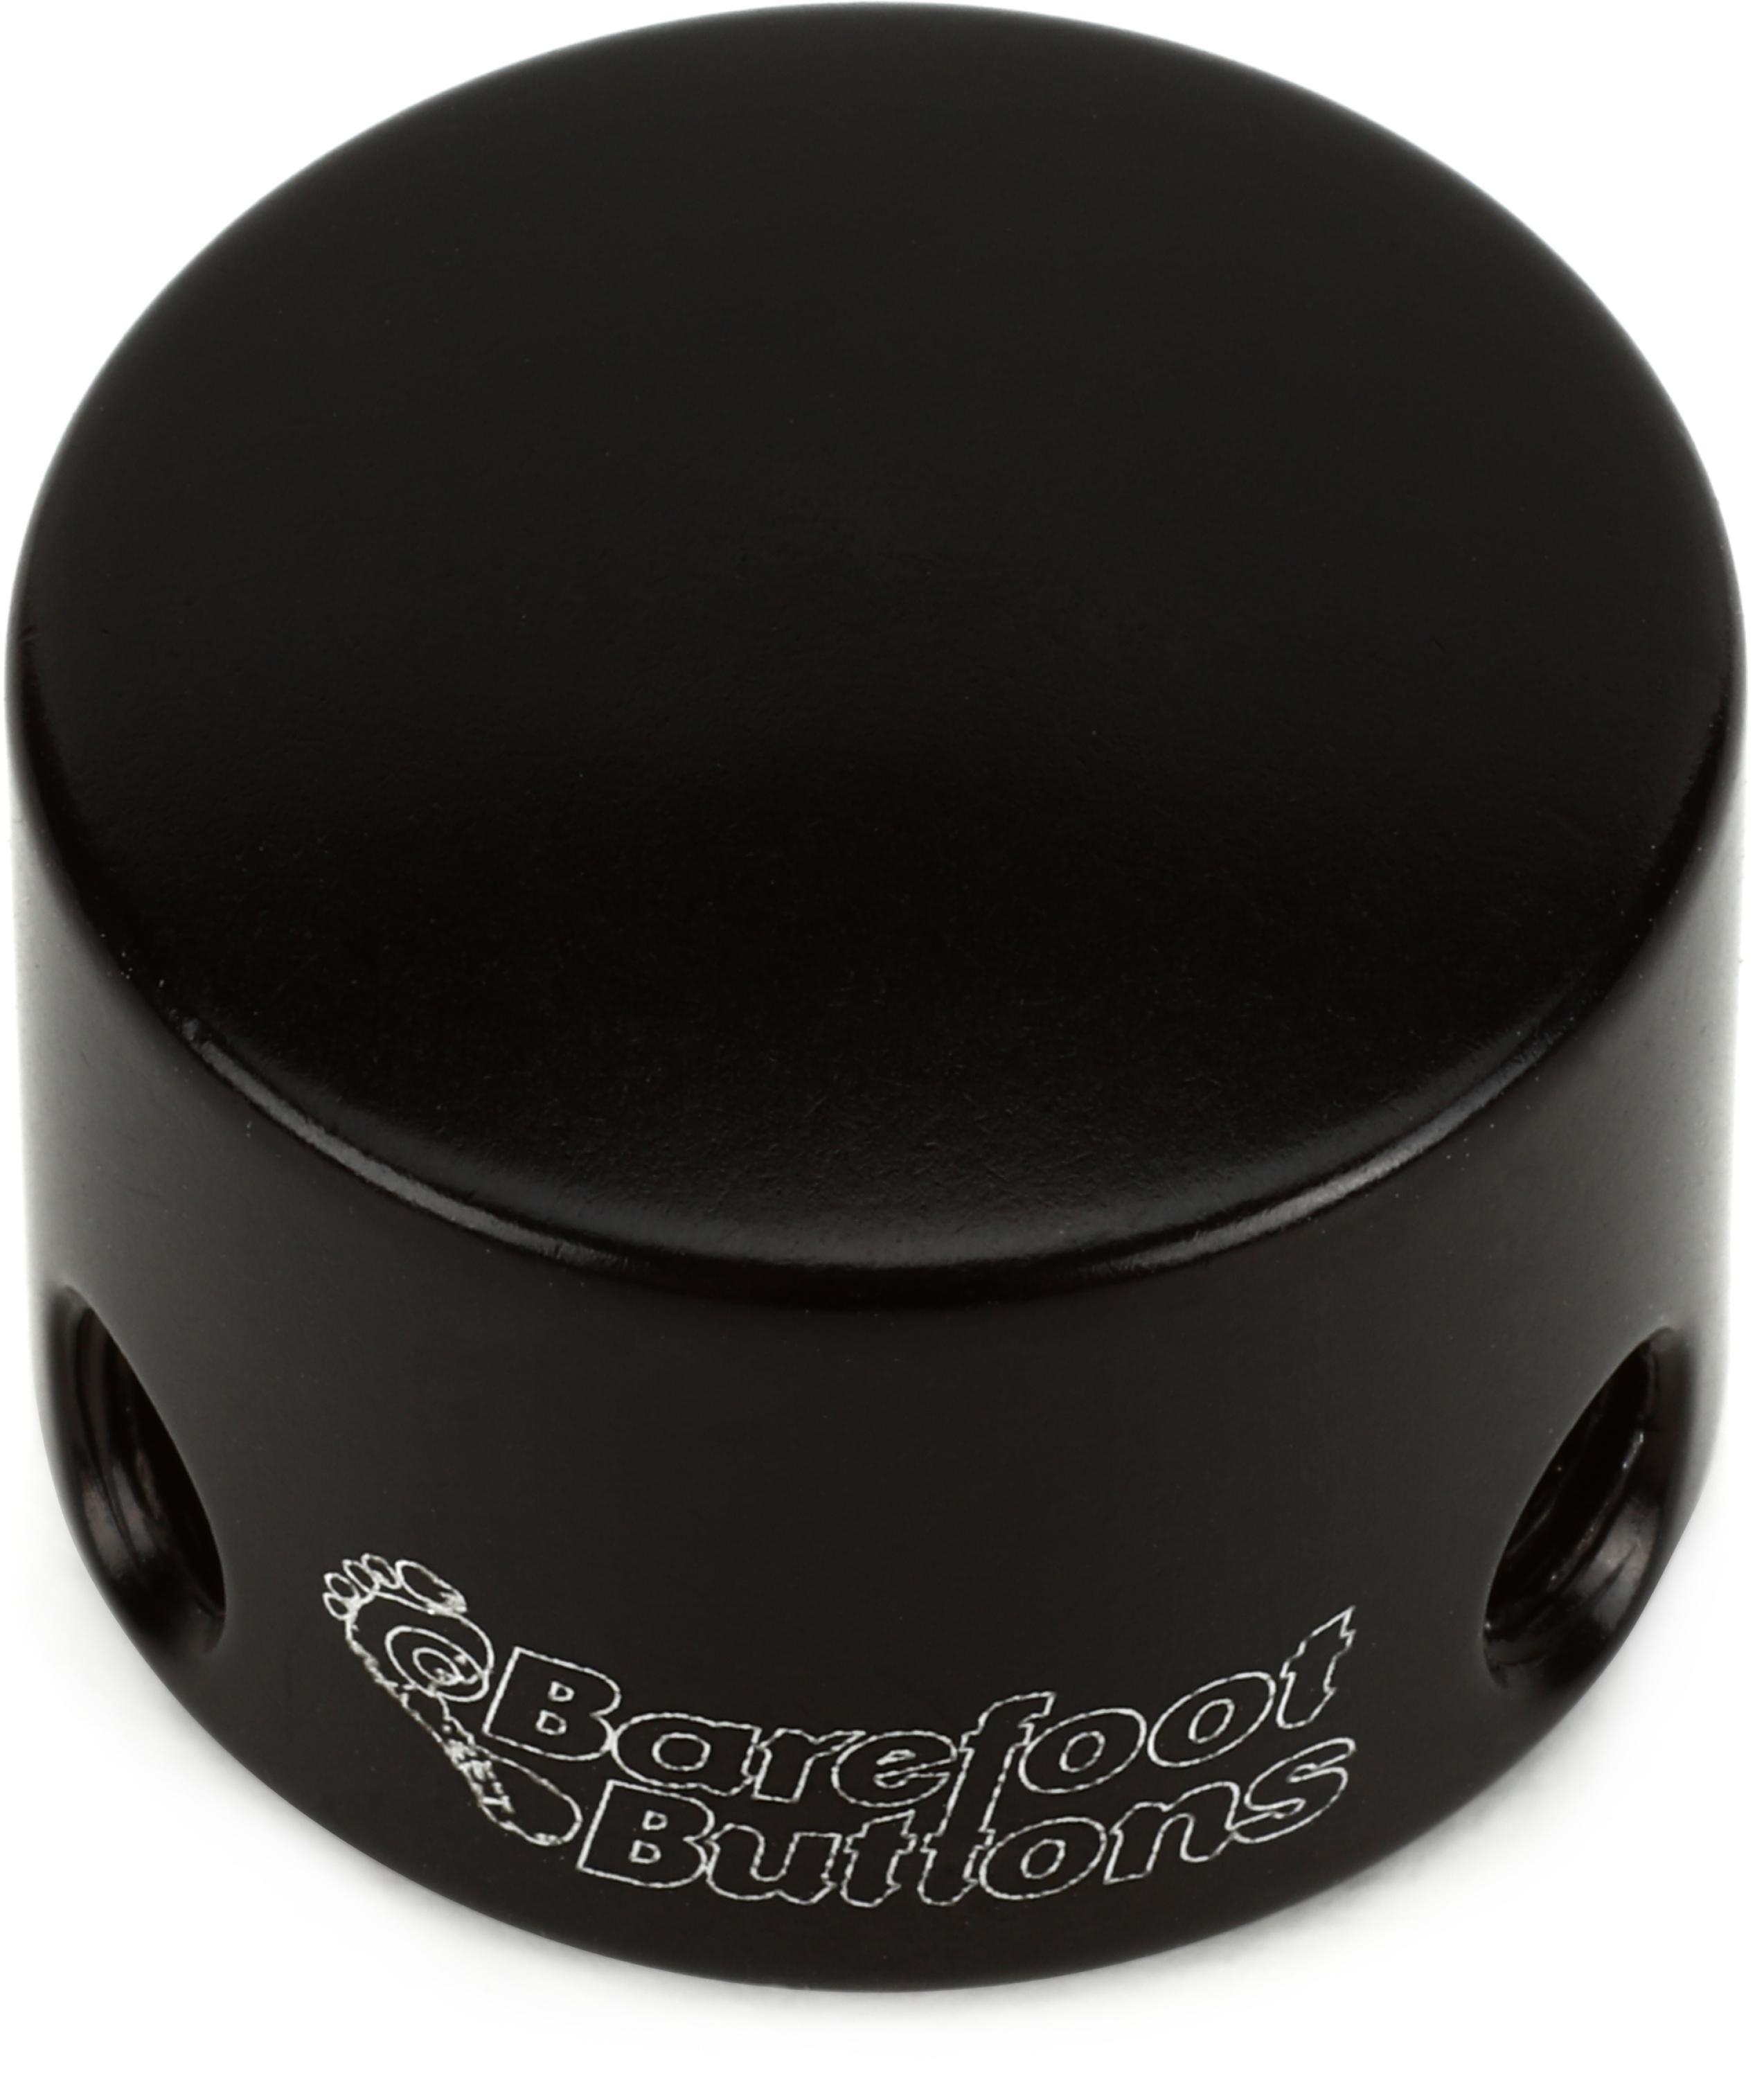 Barefoot Buttons V1 Tallboy Mini Footswitch Cap - Black